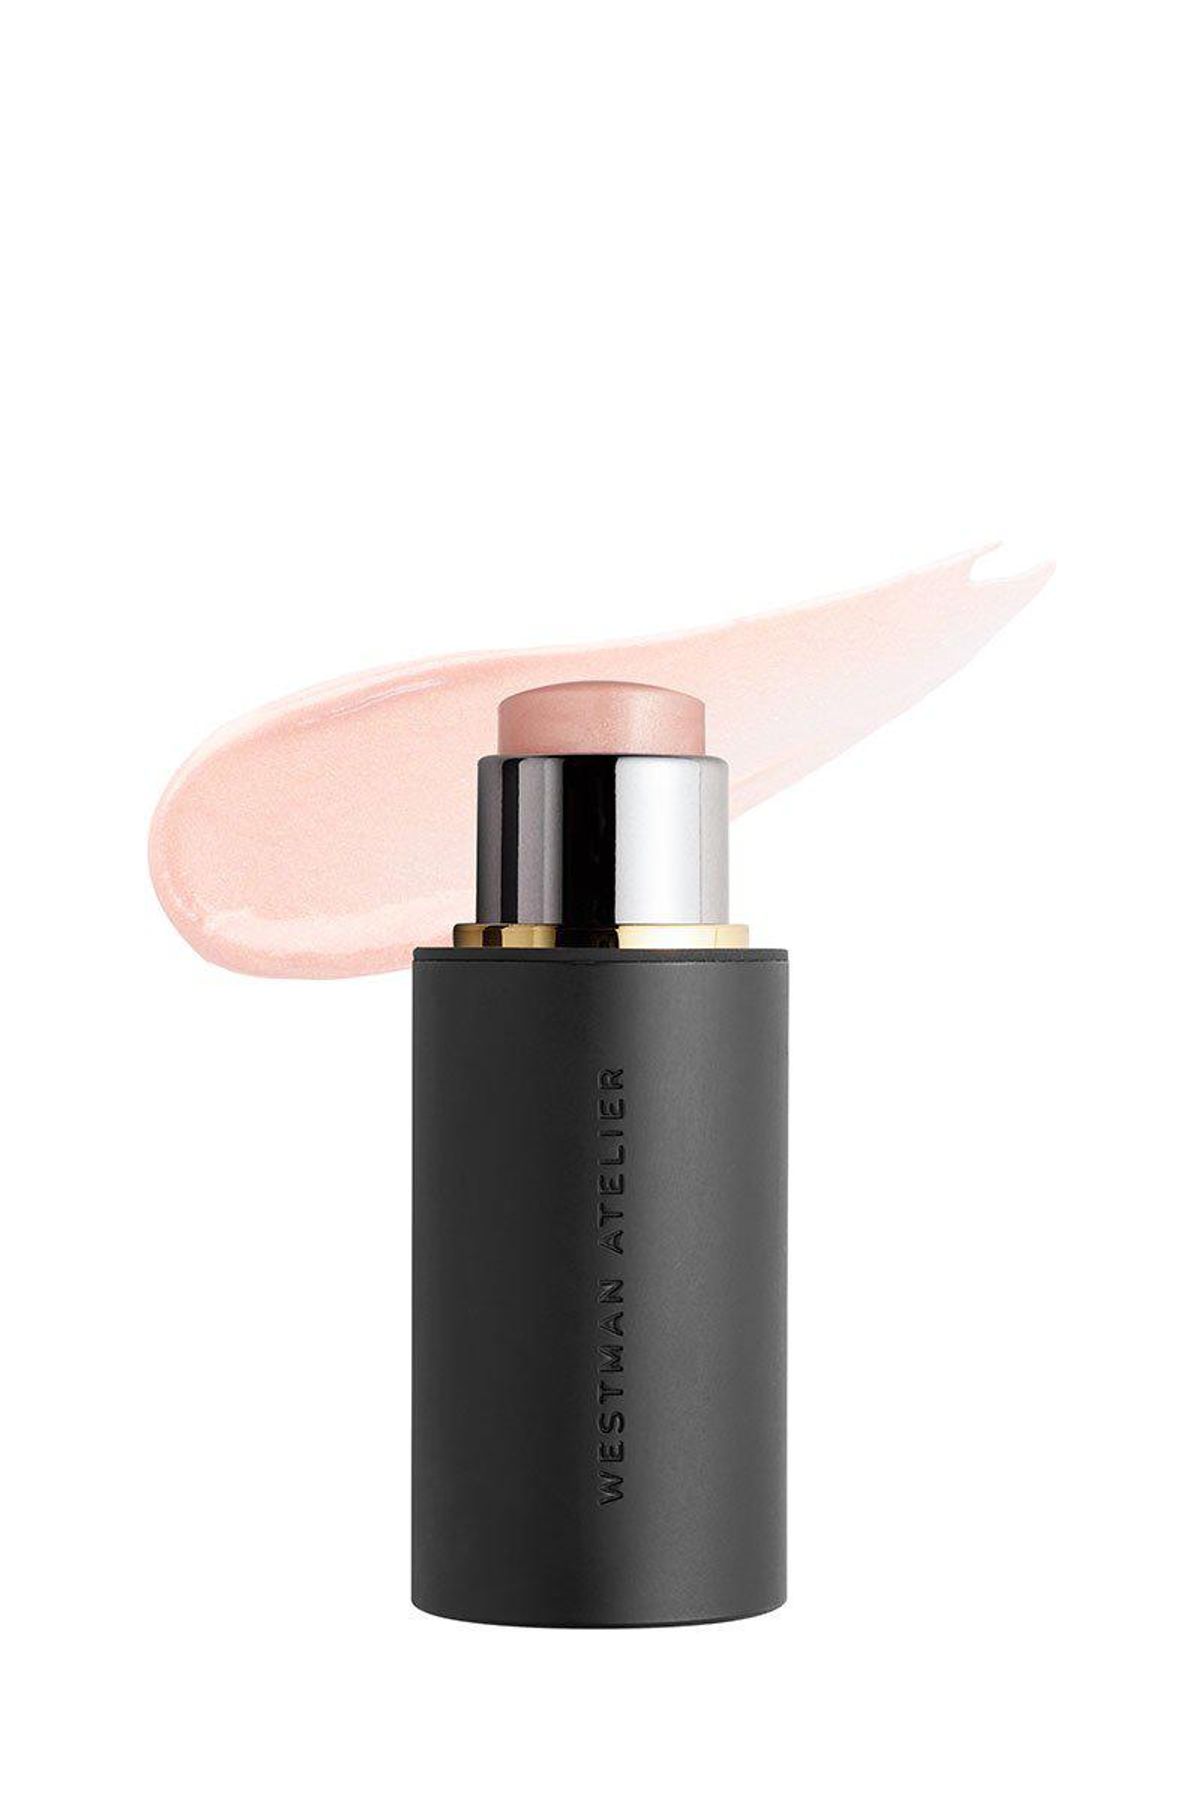 Lit Up Highlight Stick in “Nectar”